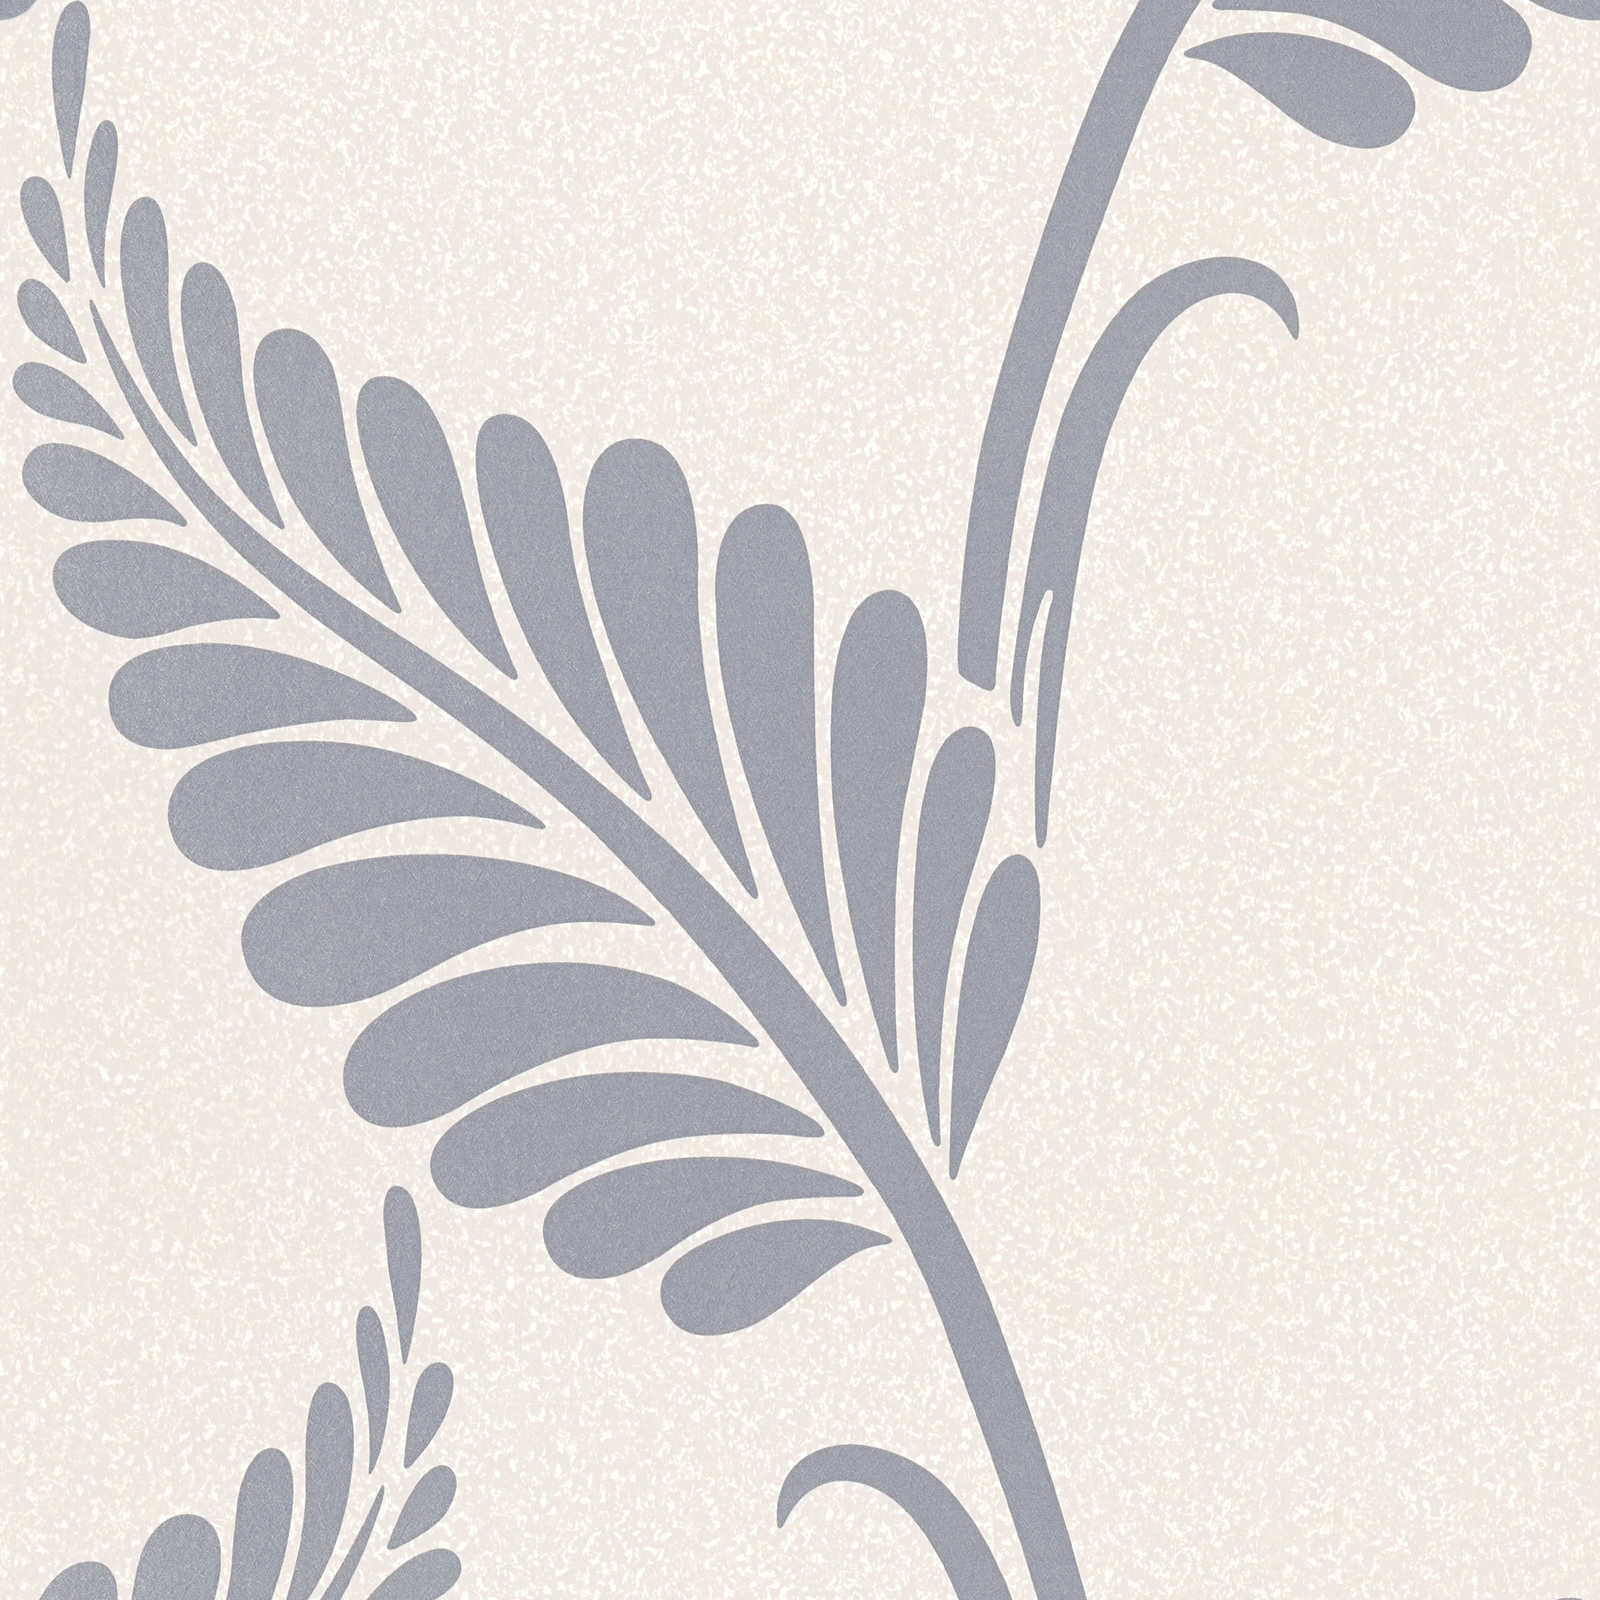 Paper wallpaper with leaves in floral style glossy - Greige, Silver
